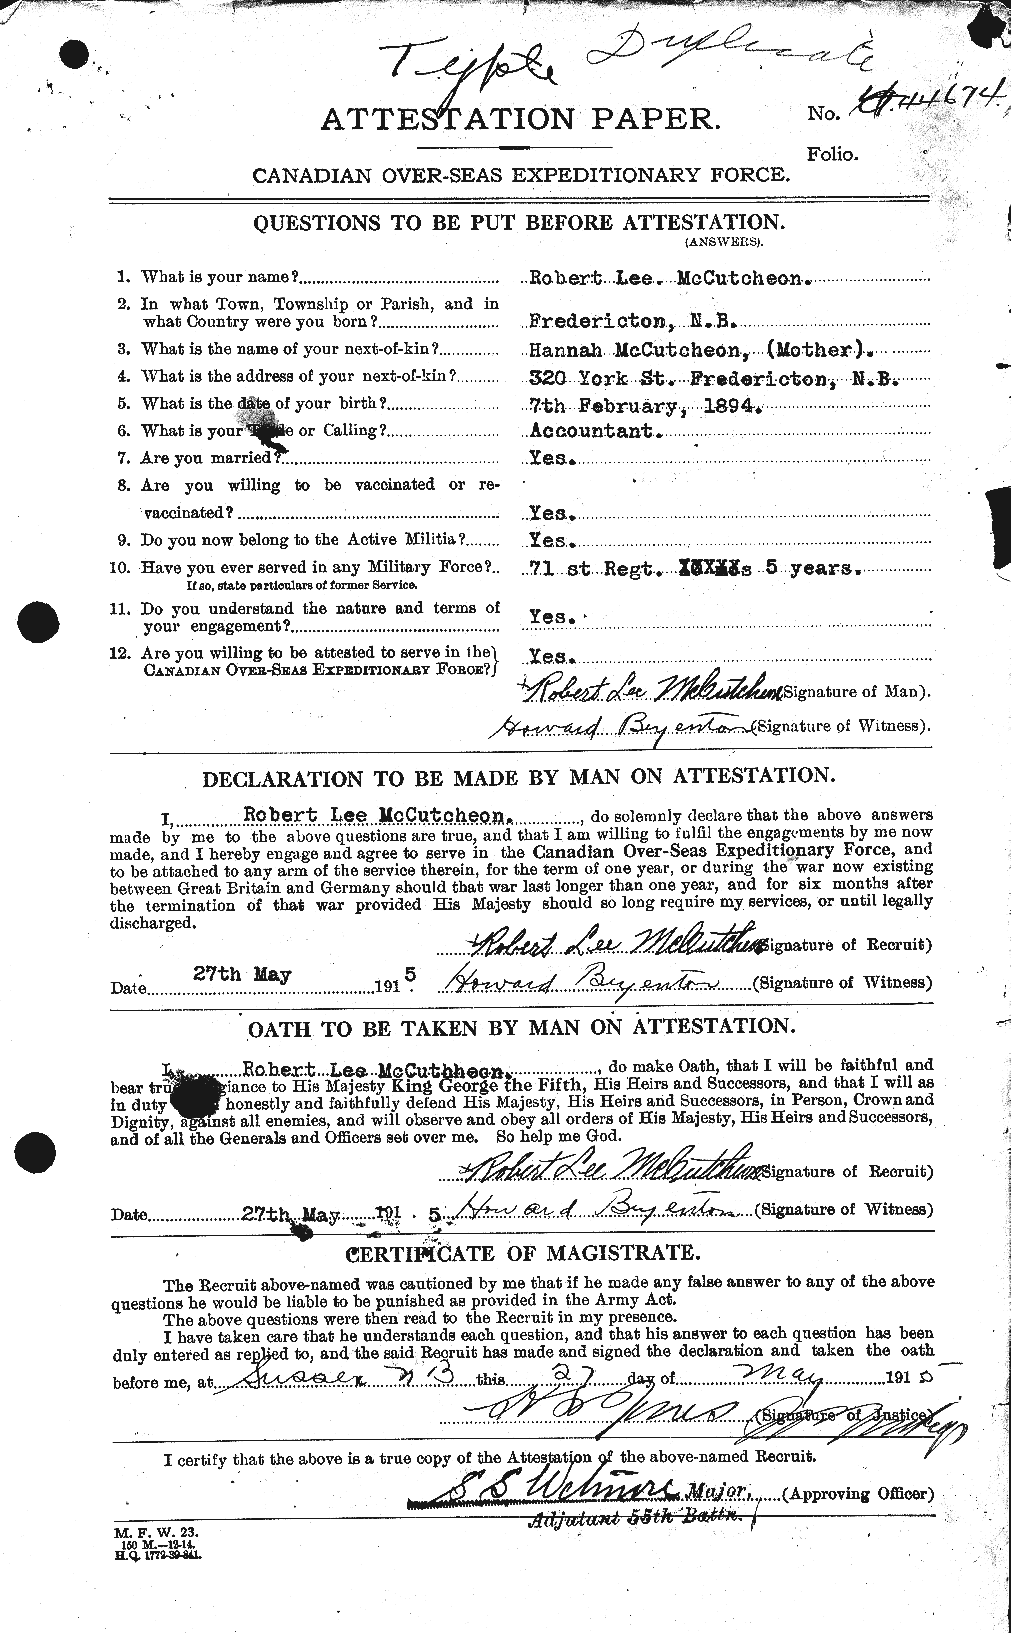 Personnel Records of the First World War - CEF 136753a